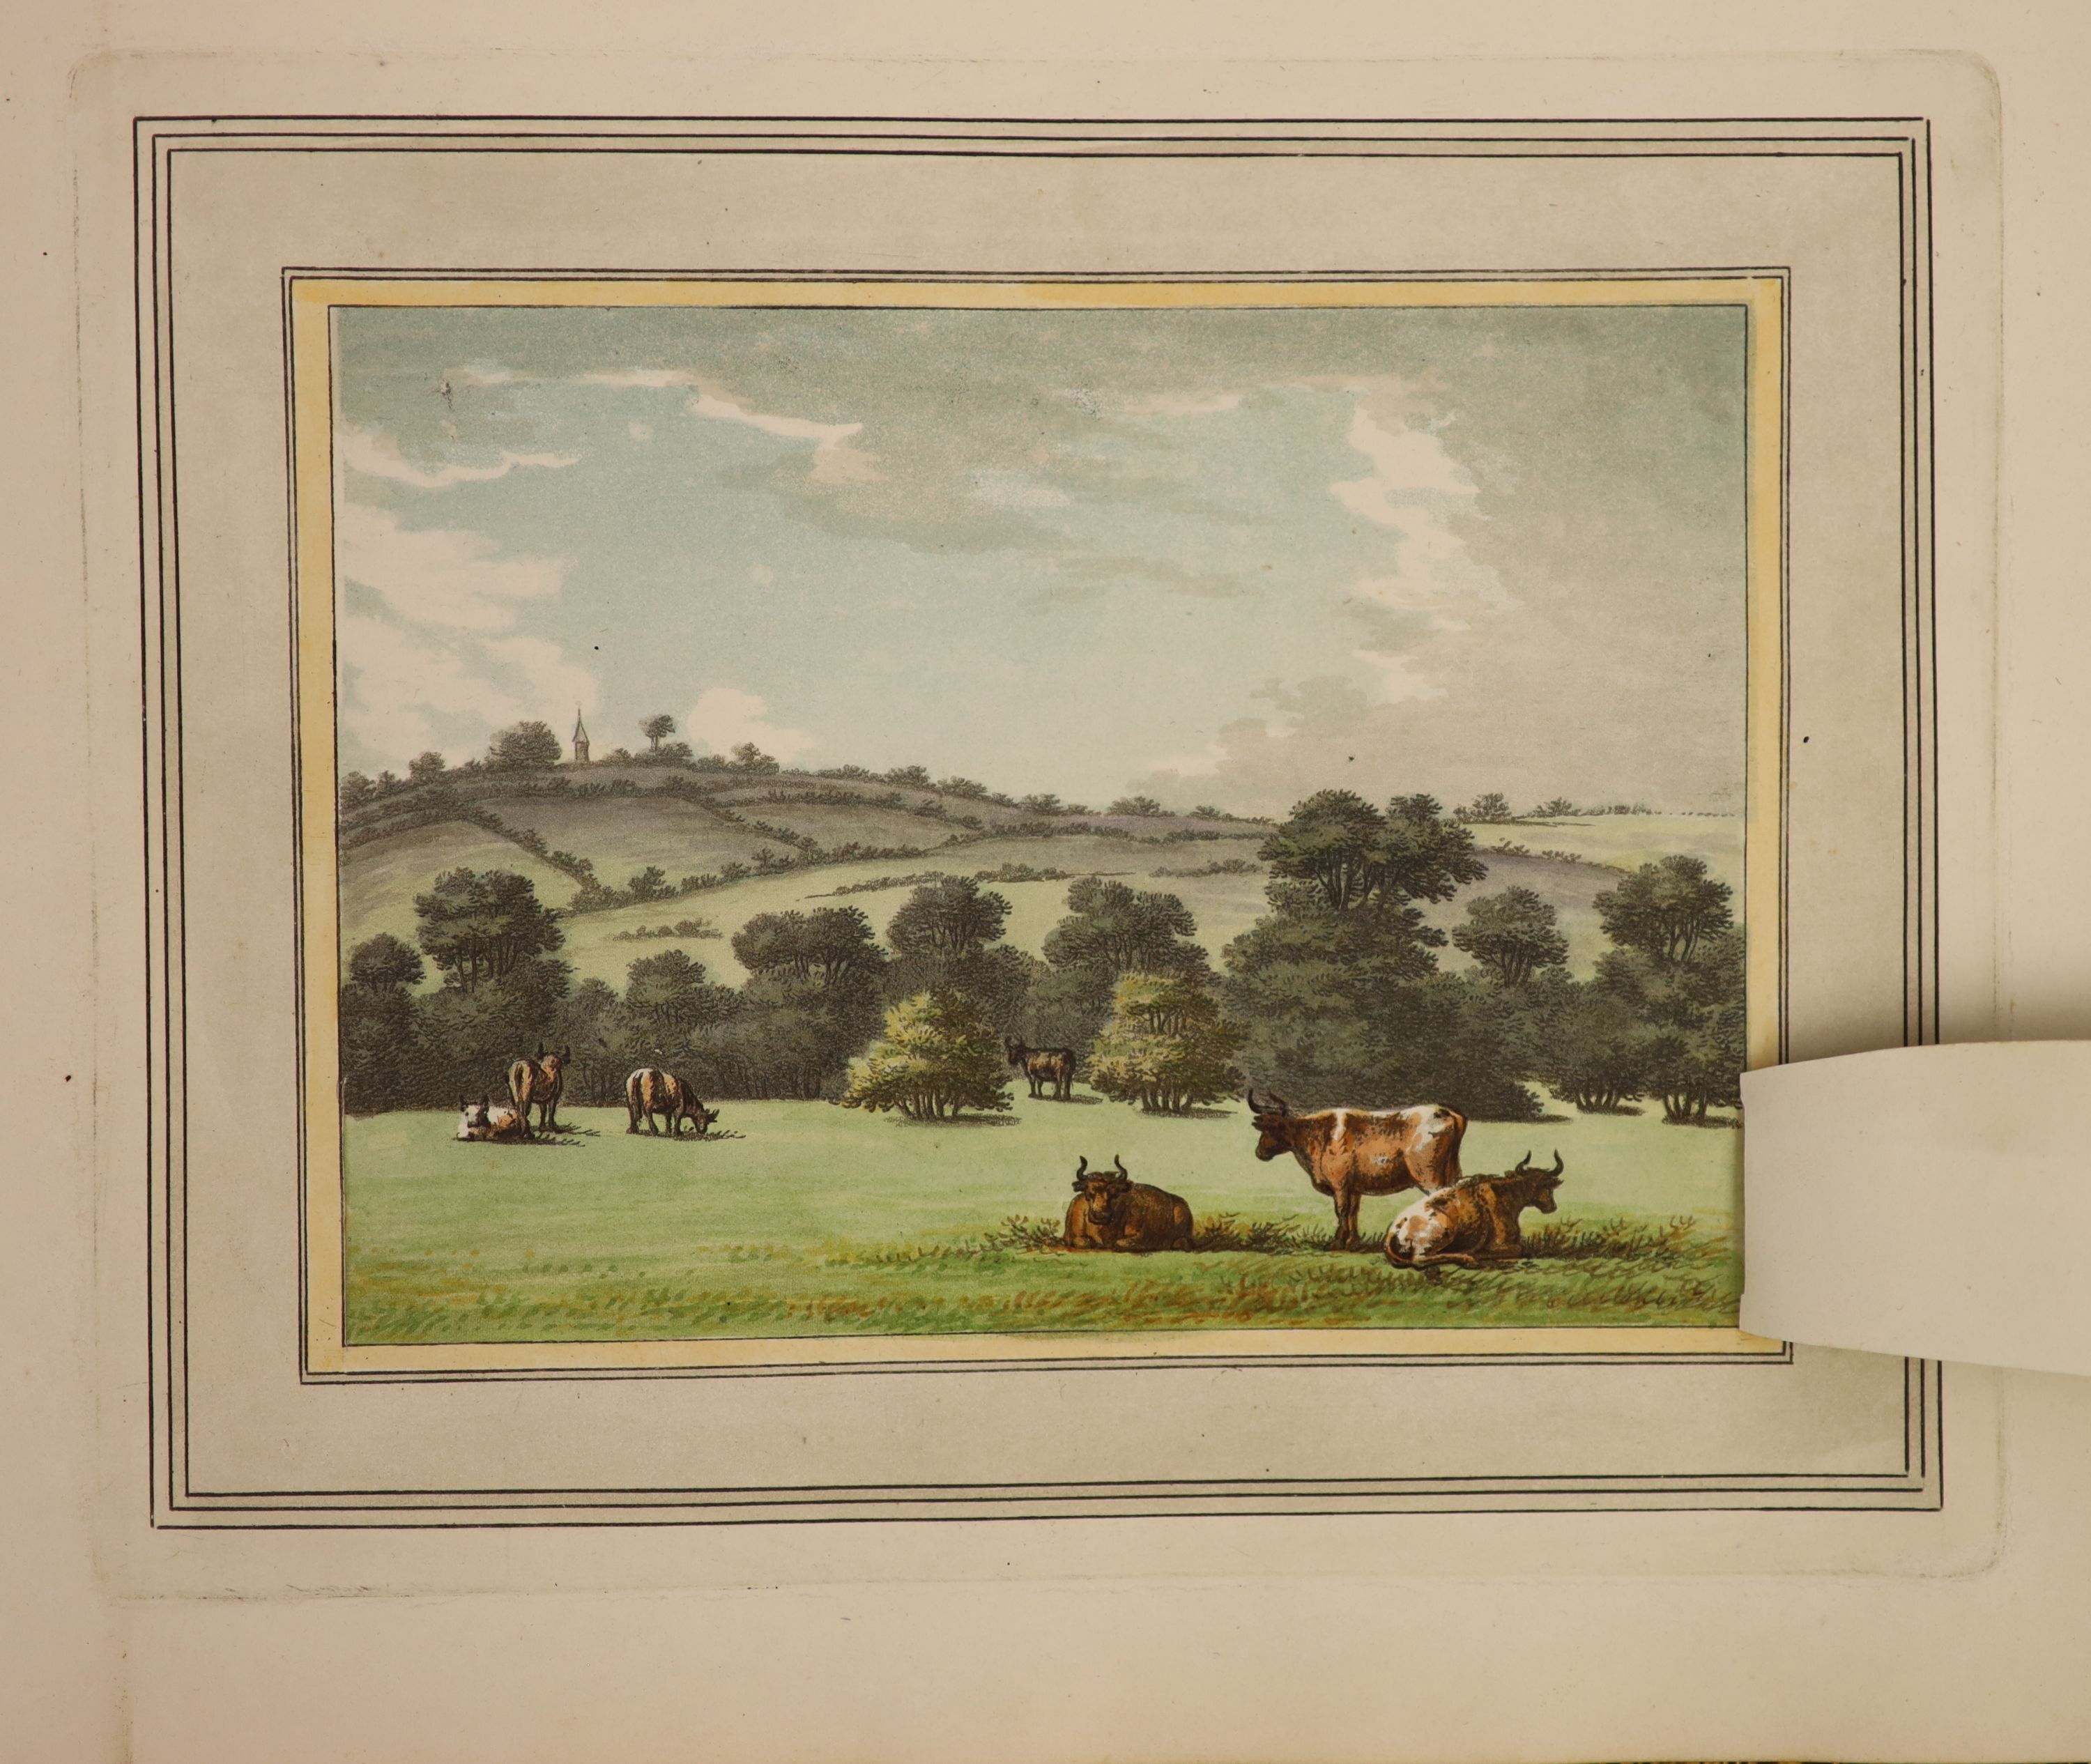 Repton, Humphry - Sketches and Hints on Landscape Gardening, oblong folio, calf gilt, with 10 hand-coloured plates with overslips, and 6 uncoloured plates, 4 with overslips, London, [1794]